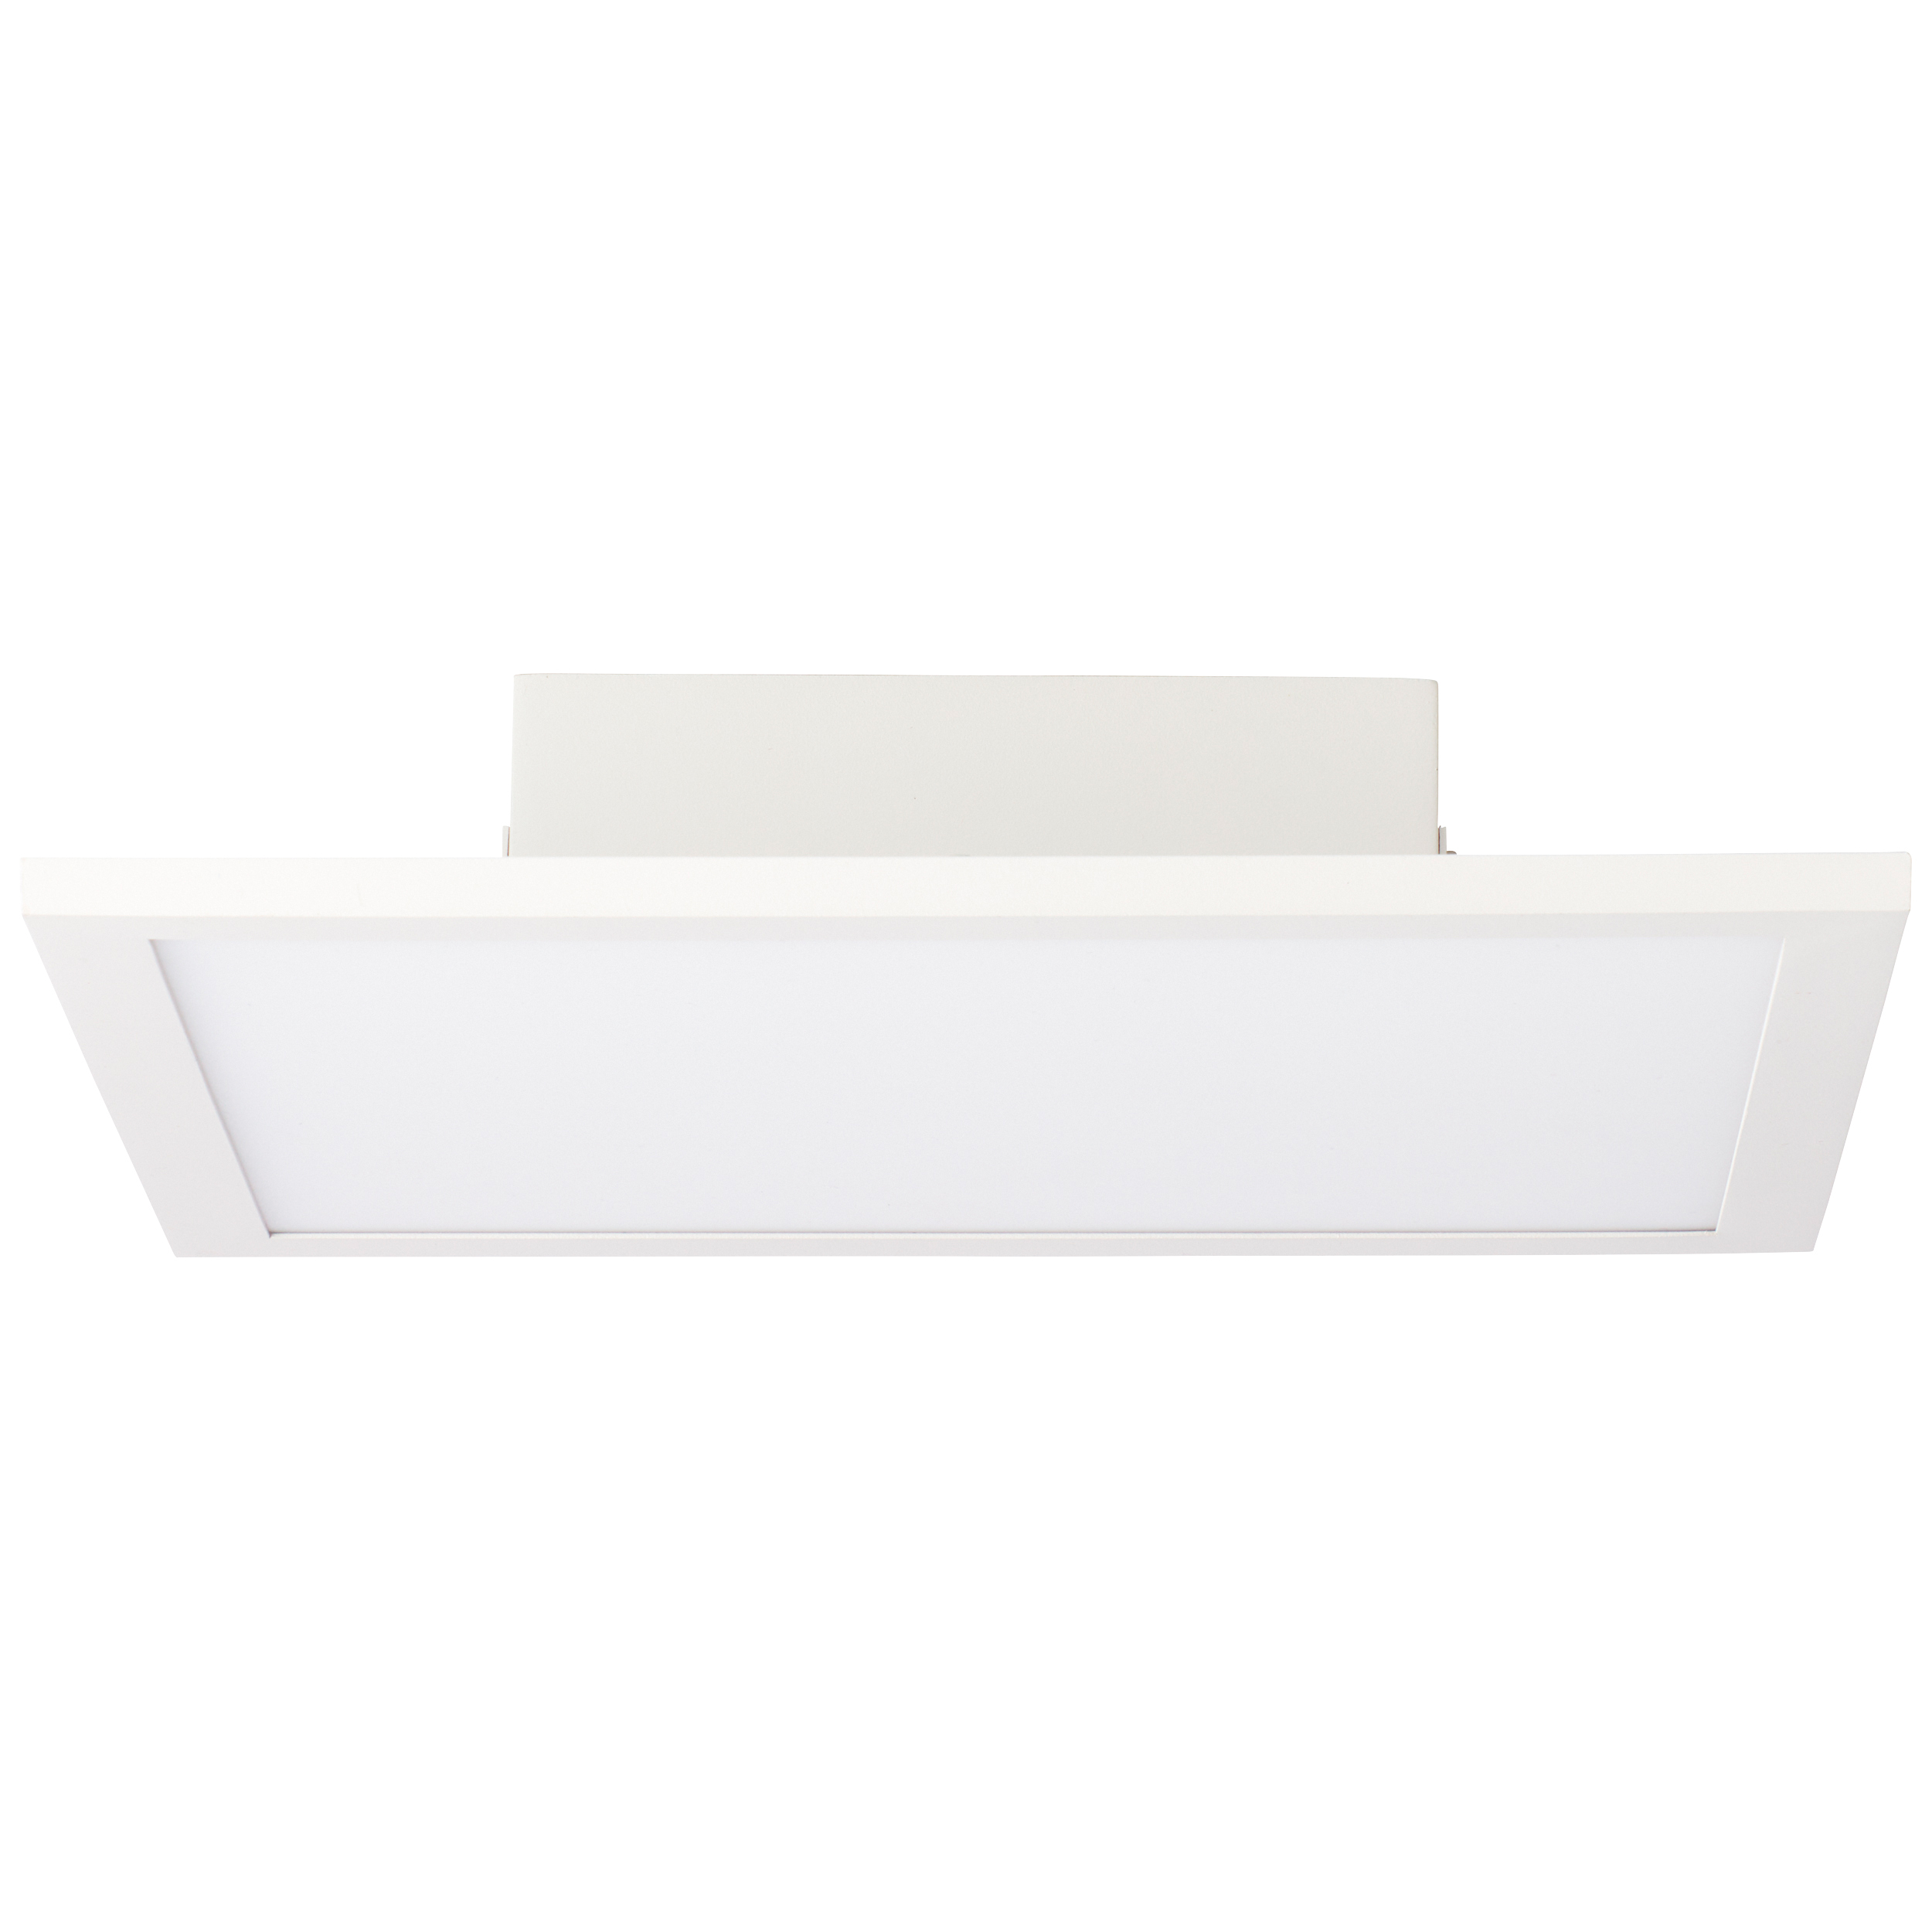 Buffi LED surface-mounted ceiling panel 30x30cm white/cold white | G90355A85 | Panels